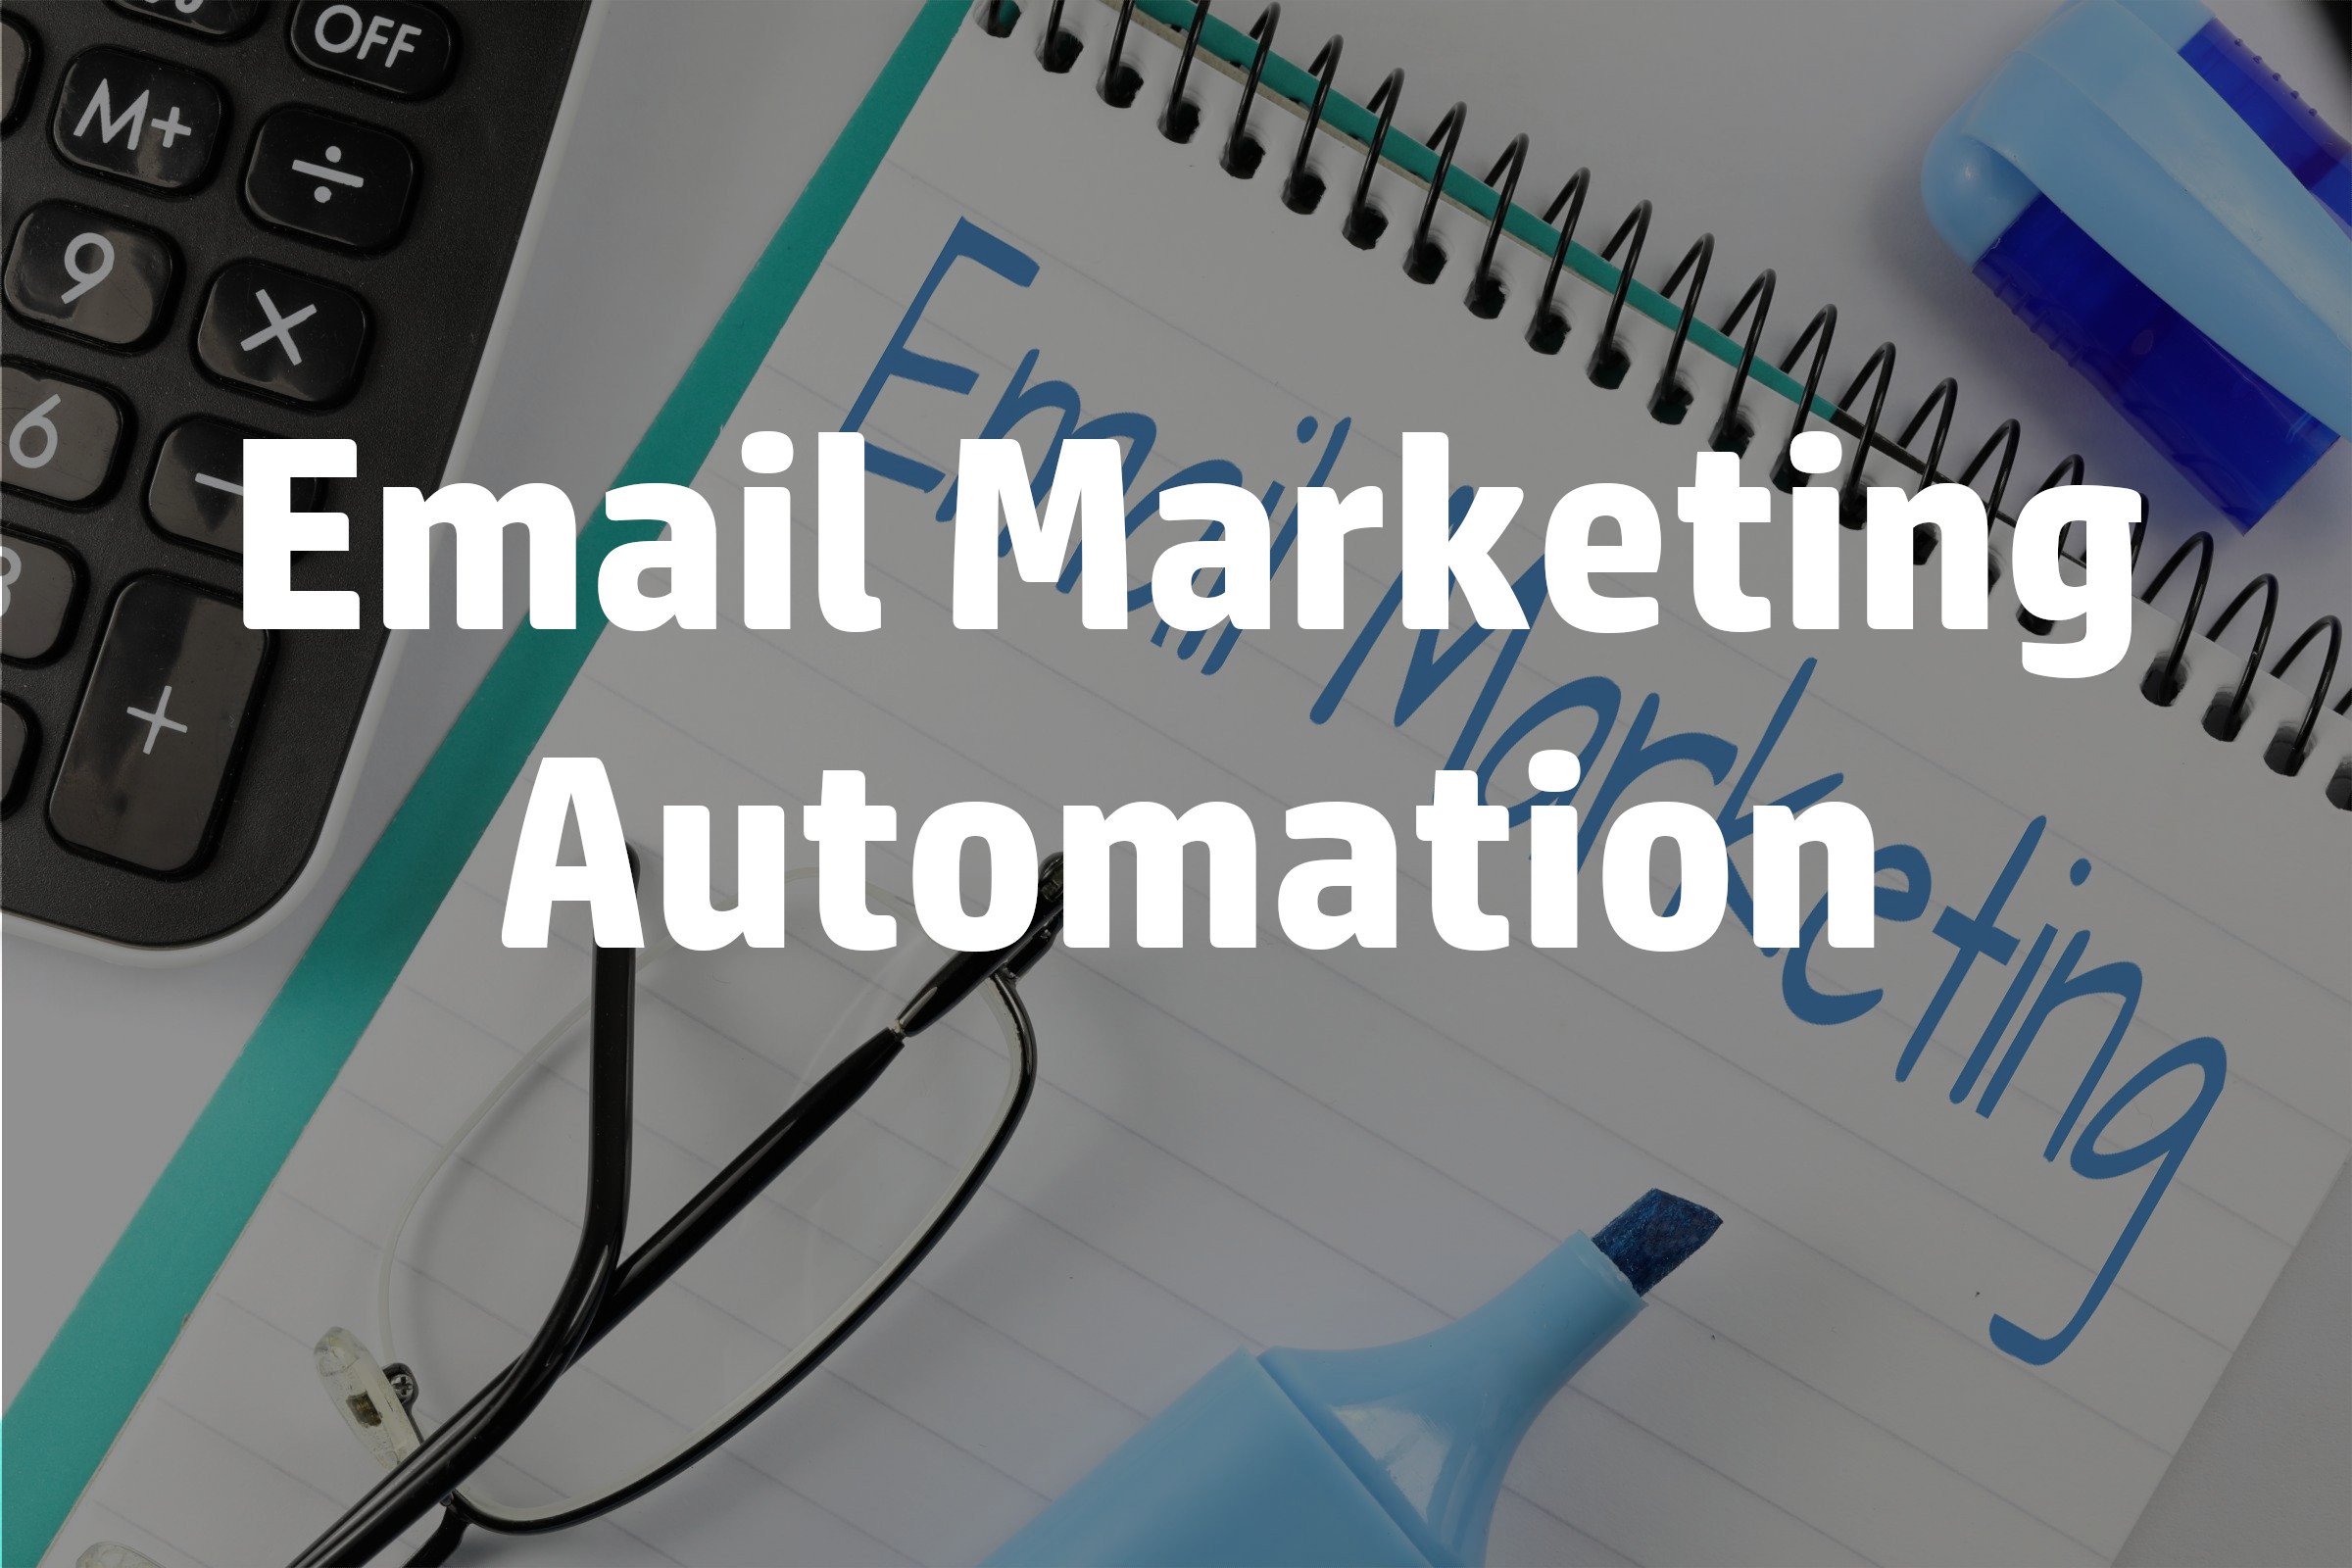 Email Marketing Automation: Tools and Tactics for Efficiency